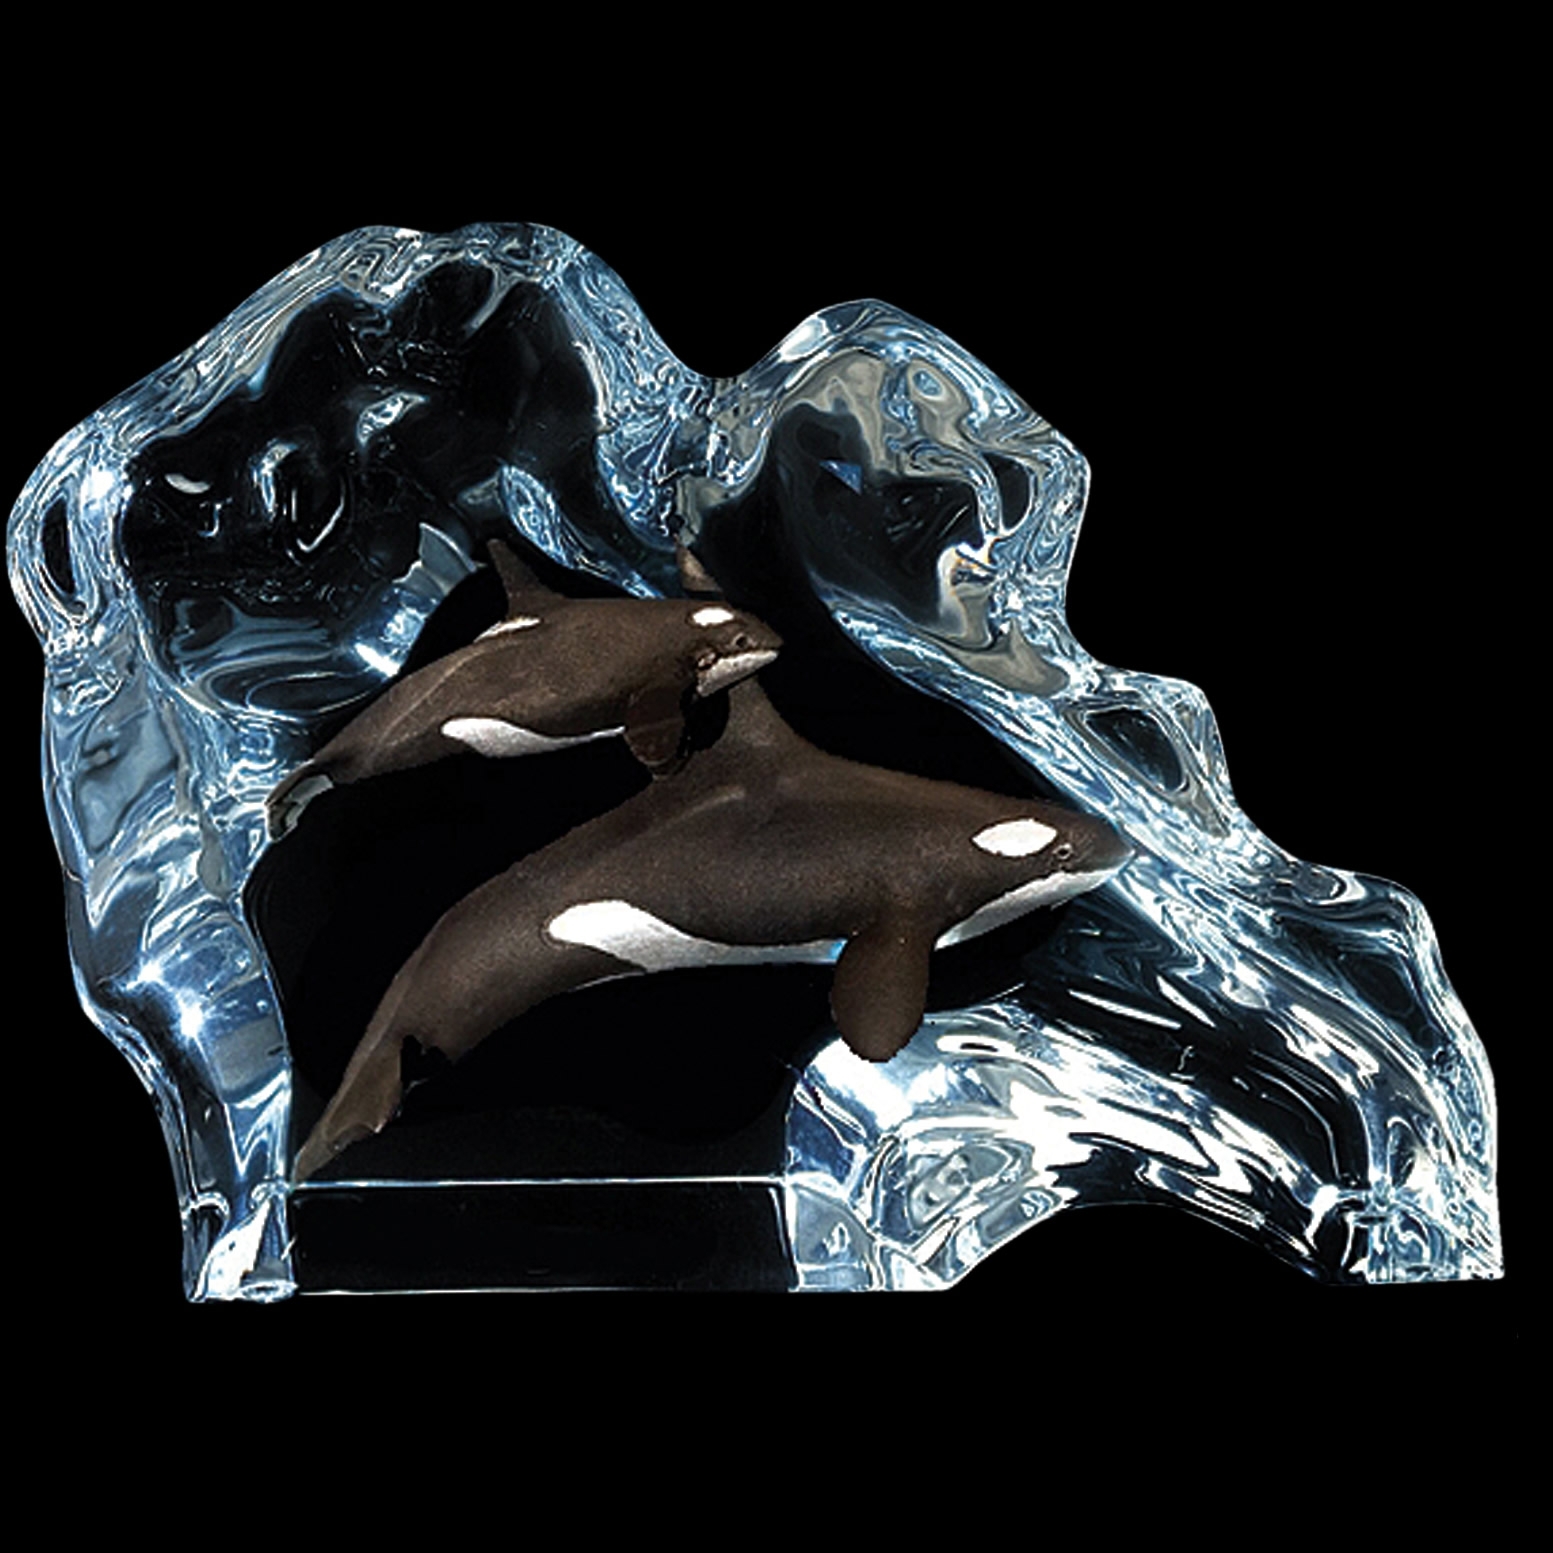 Orca Wave Whale Sculpture by Kitty Cantrell